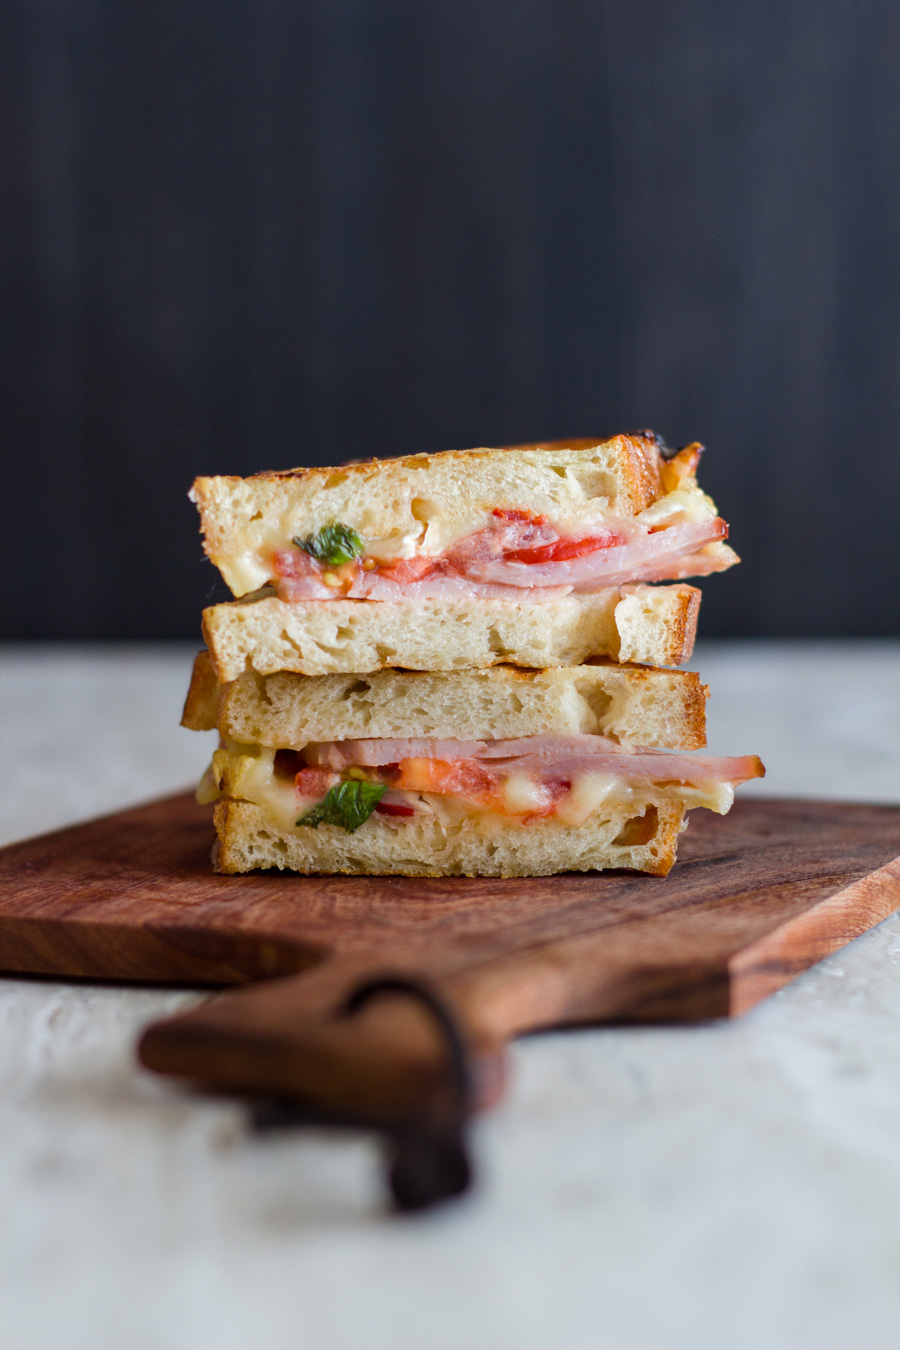 Take your grilled cheese experience to the next level with a cedar plank grilled Hot Brie Melt sandwich. Mouthwatering flavors of spicy pepper jelly, basil, brie cheese, tomatoes, and ham are the perfect combination! Recipe at www.designsofanykind.com